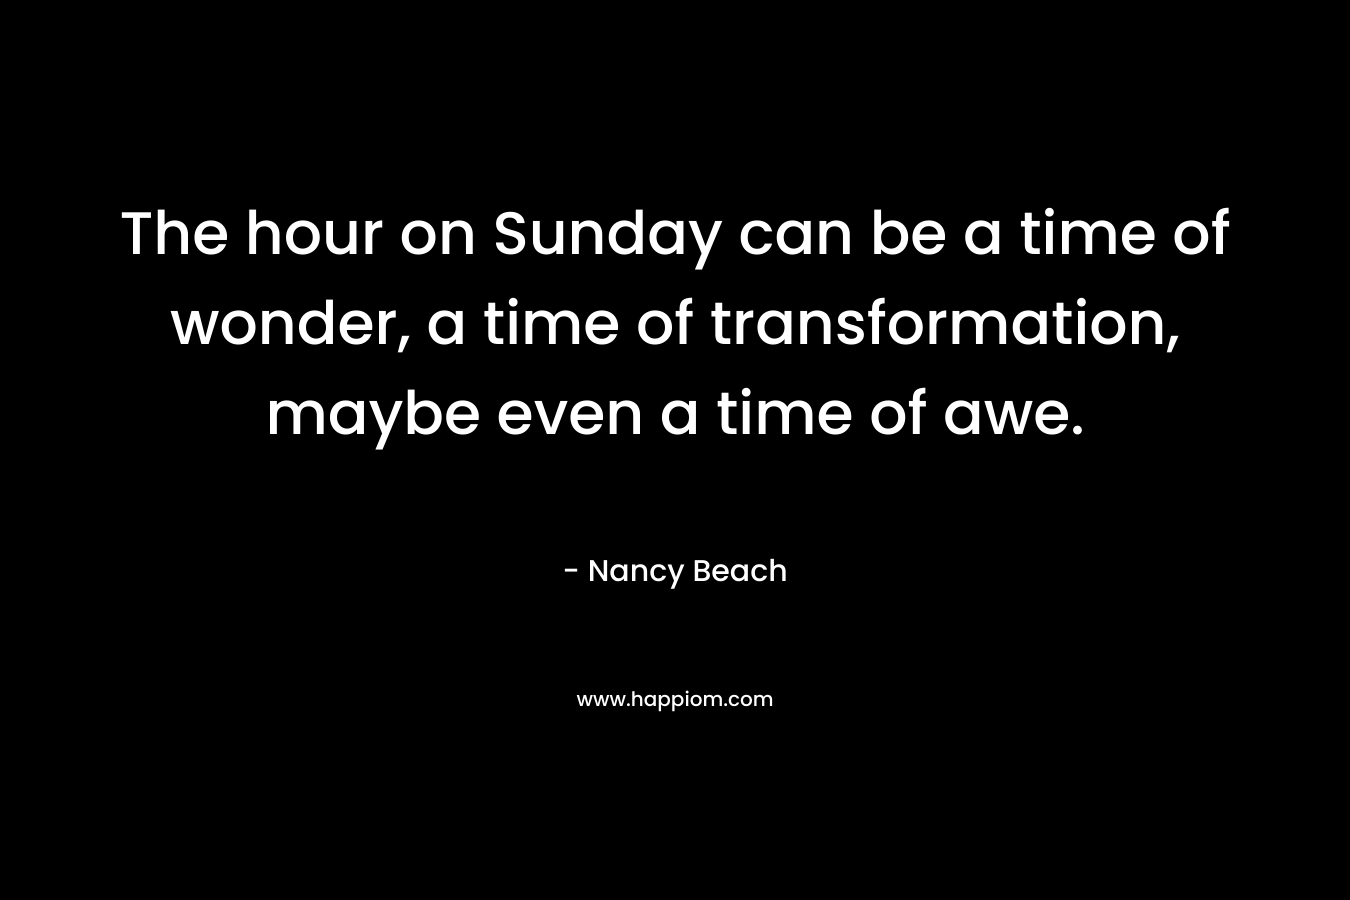 The hour on Sunday can be a time of wonder, a time of transformation, maybe even a time of awe. – Nancy Beach